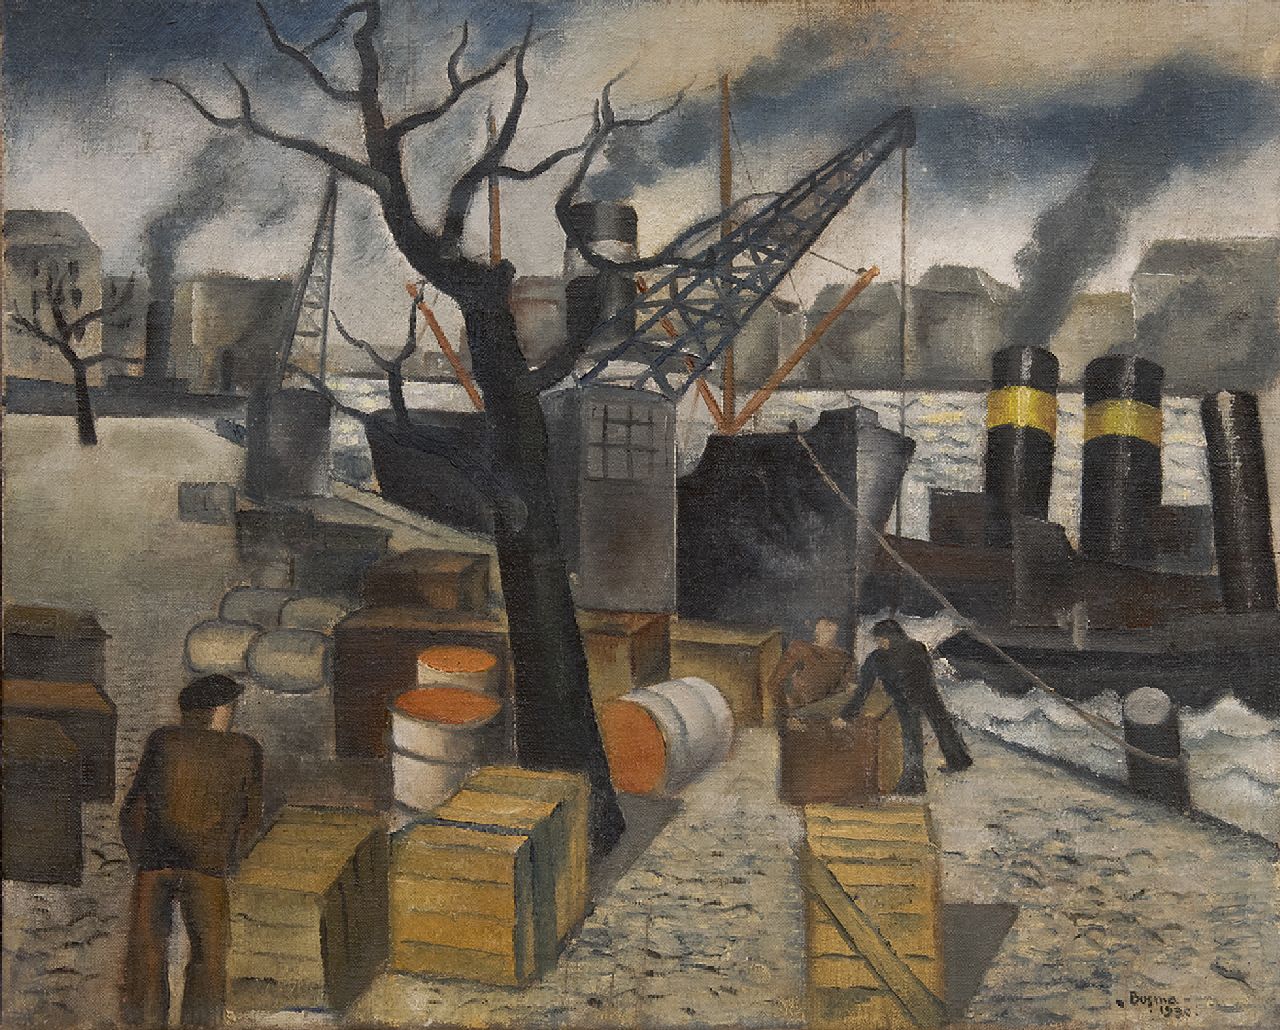 Bosma W.  | Willem 'Wim' Bosma, In the harbour, oil on canvas 45.2 x 55.4 cm, signed l.r. and dated 1930